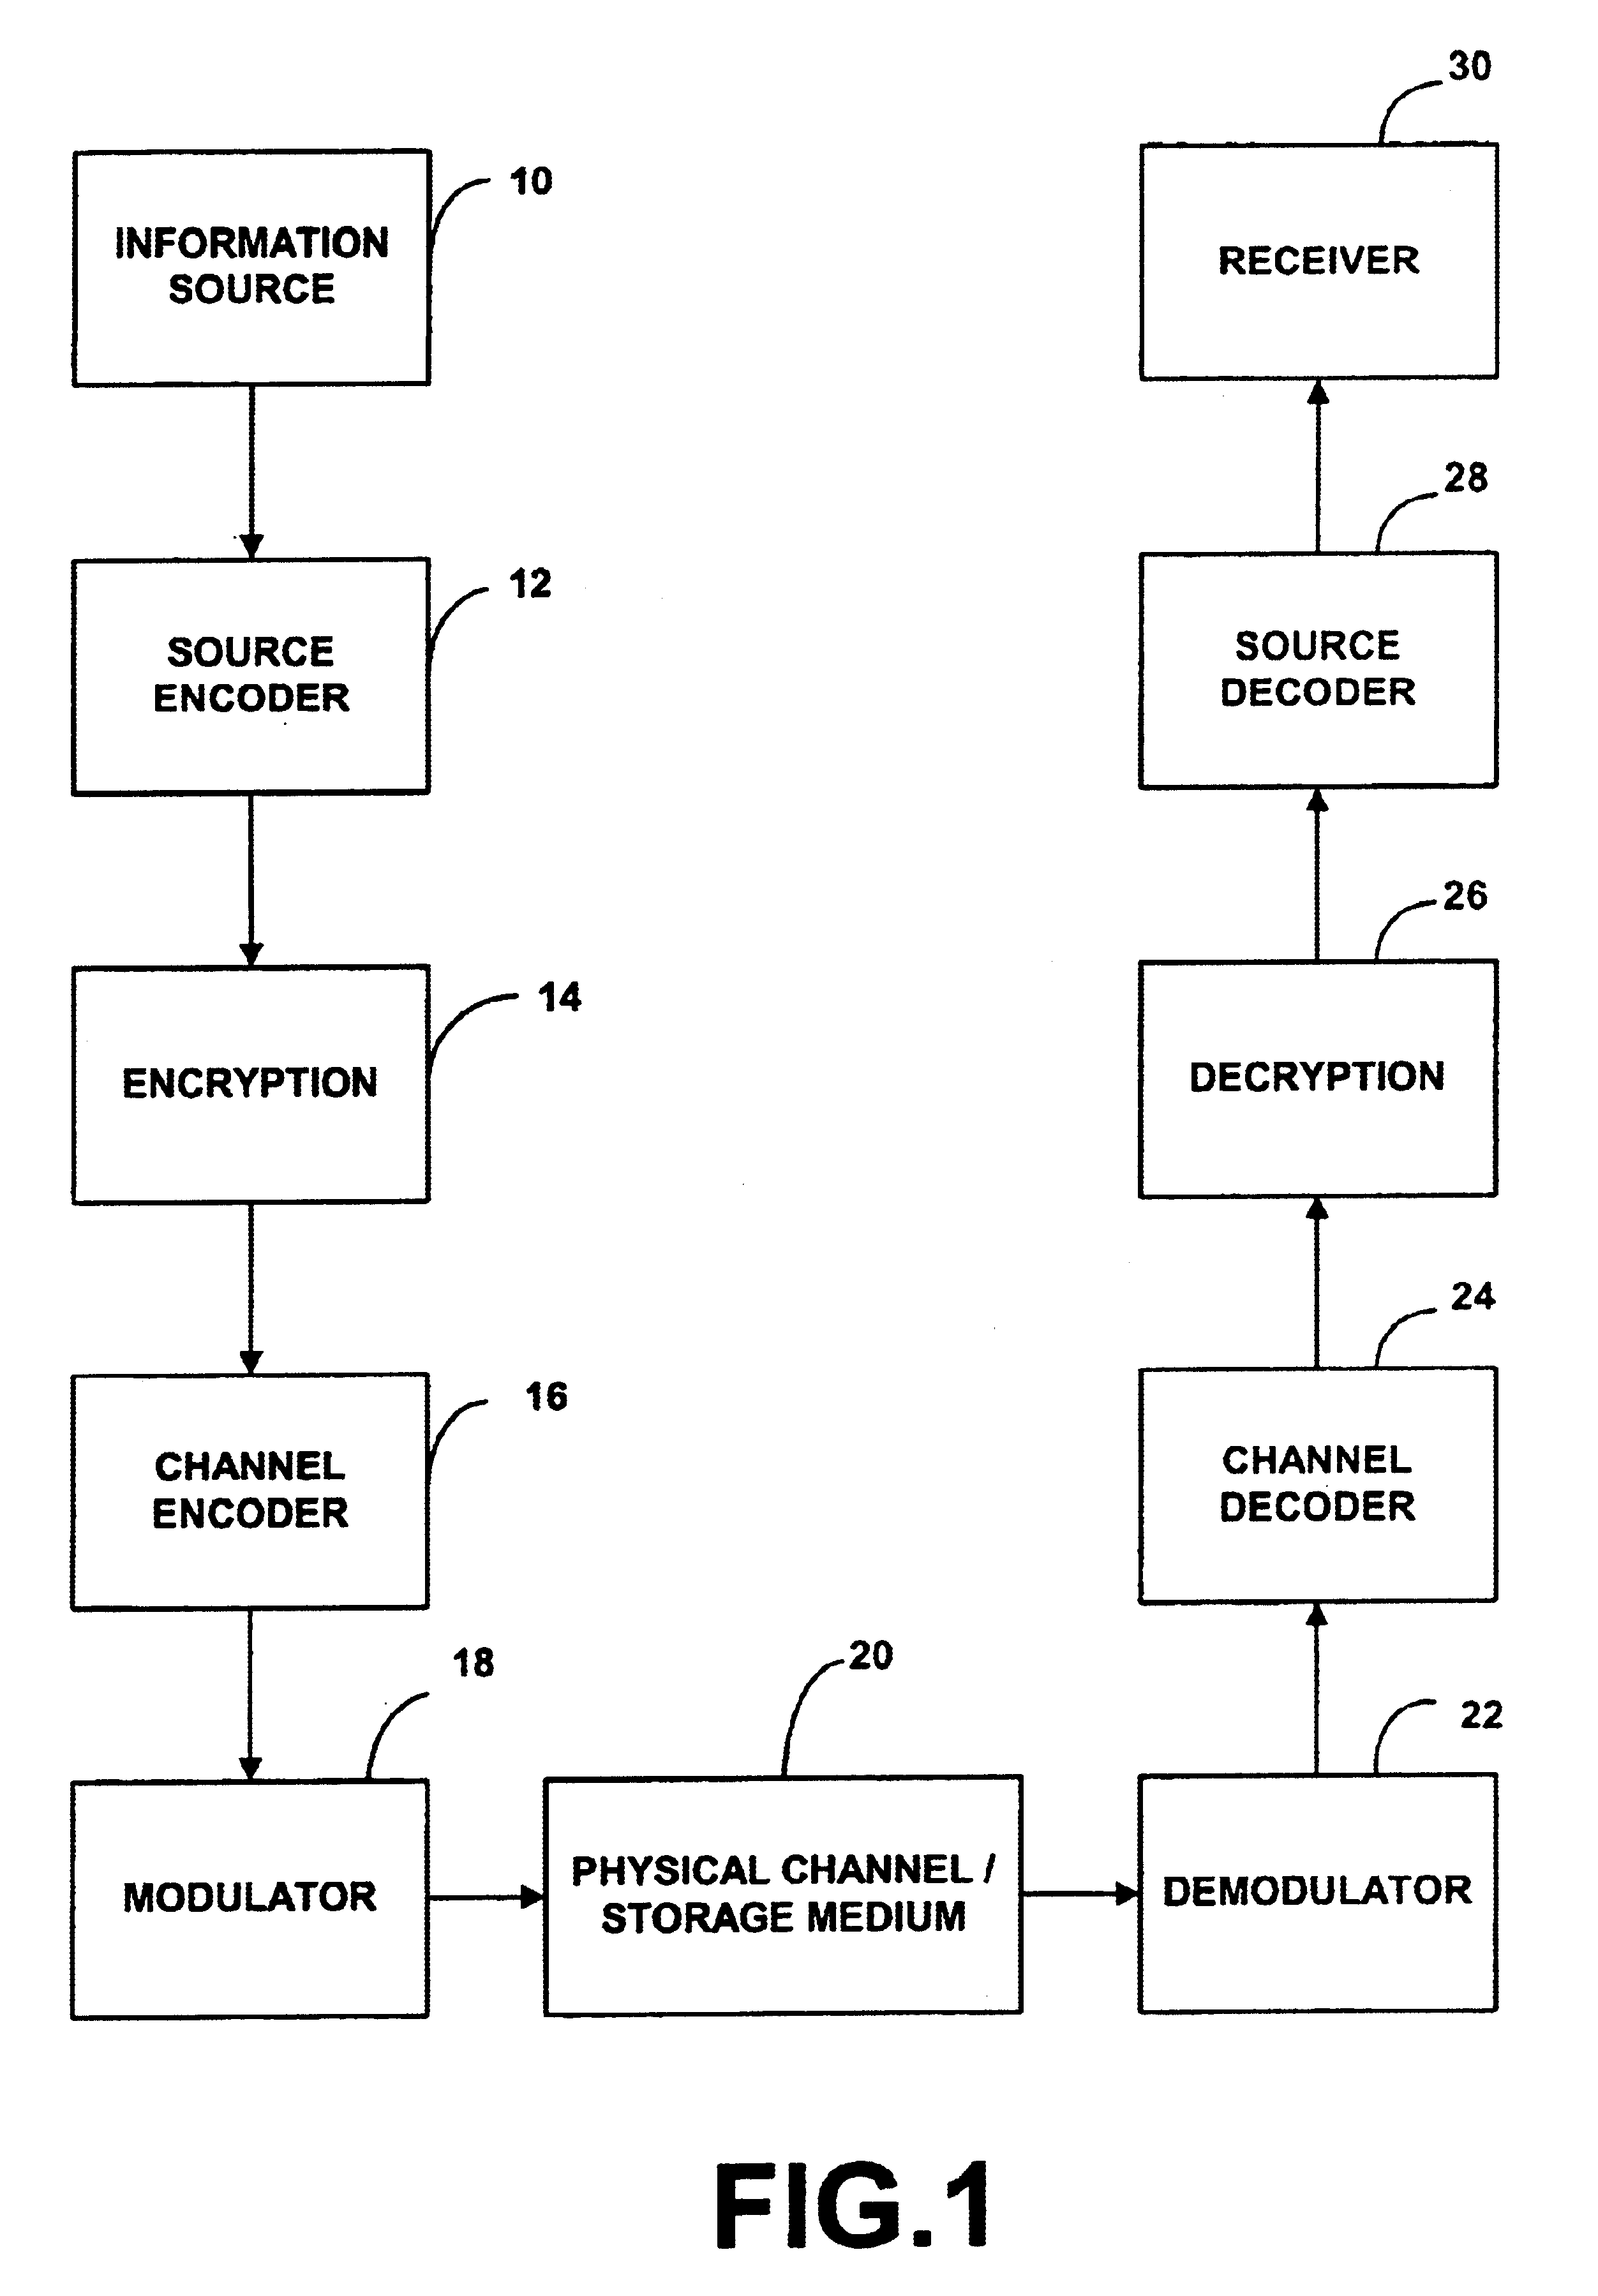 System and method for enabling efficient error correction and encryption using wavelet transforms over finite fields